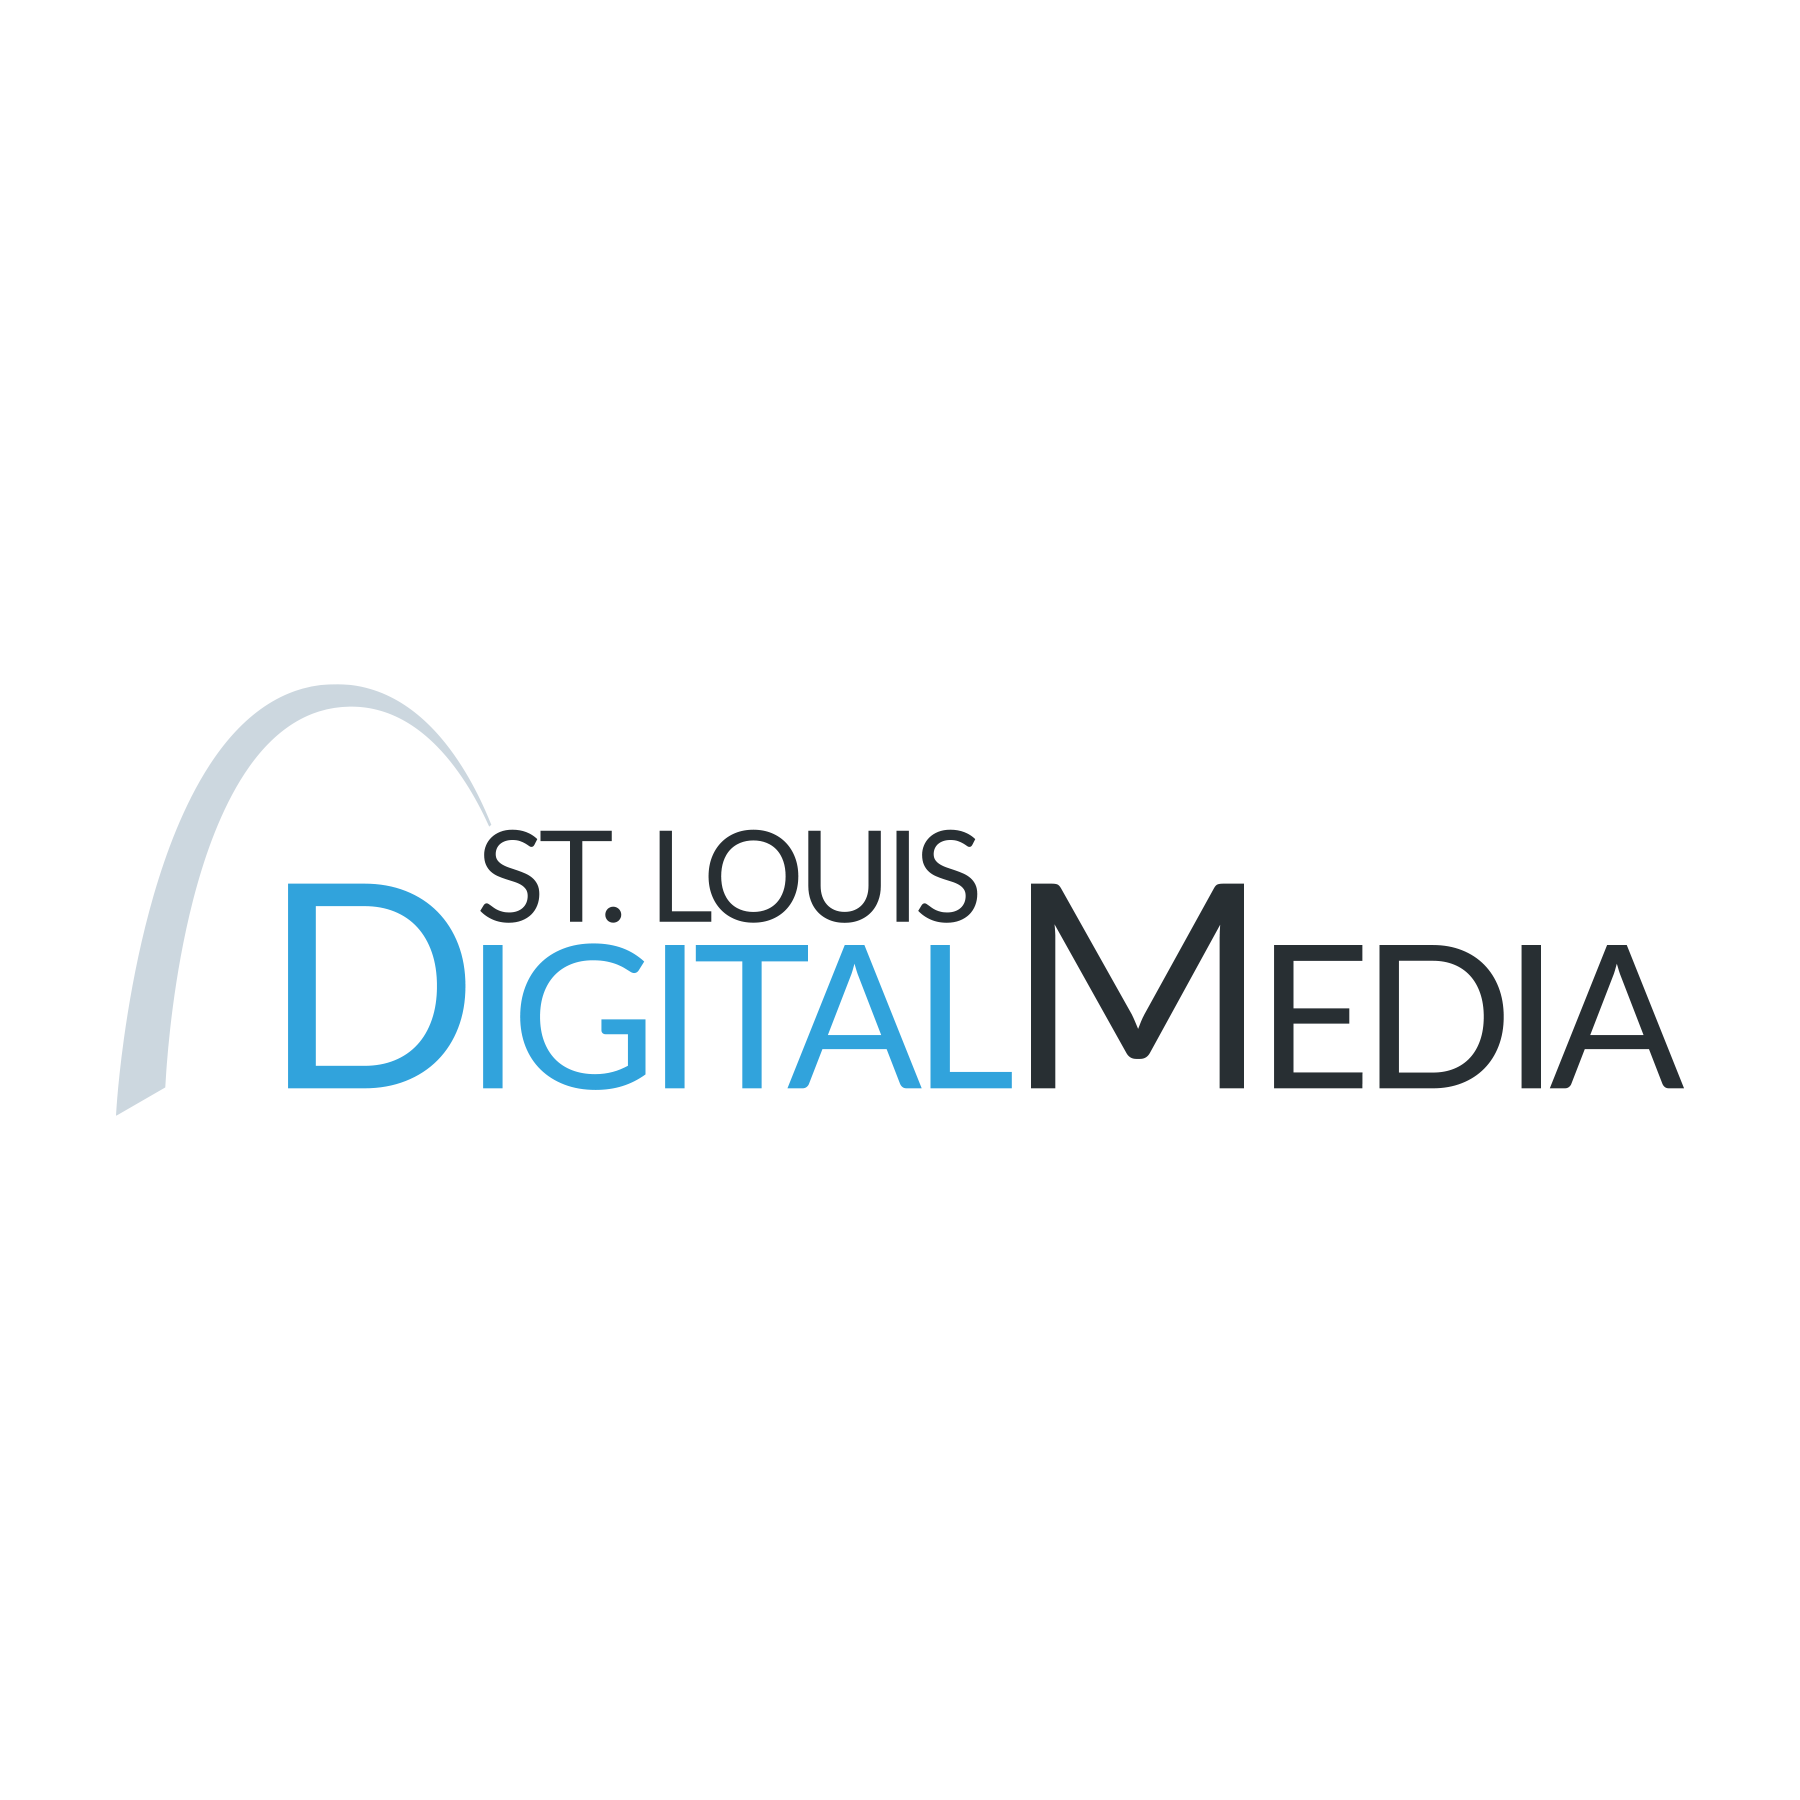 St. Louis Digital Media profile on Qualified.One